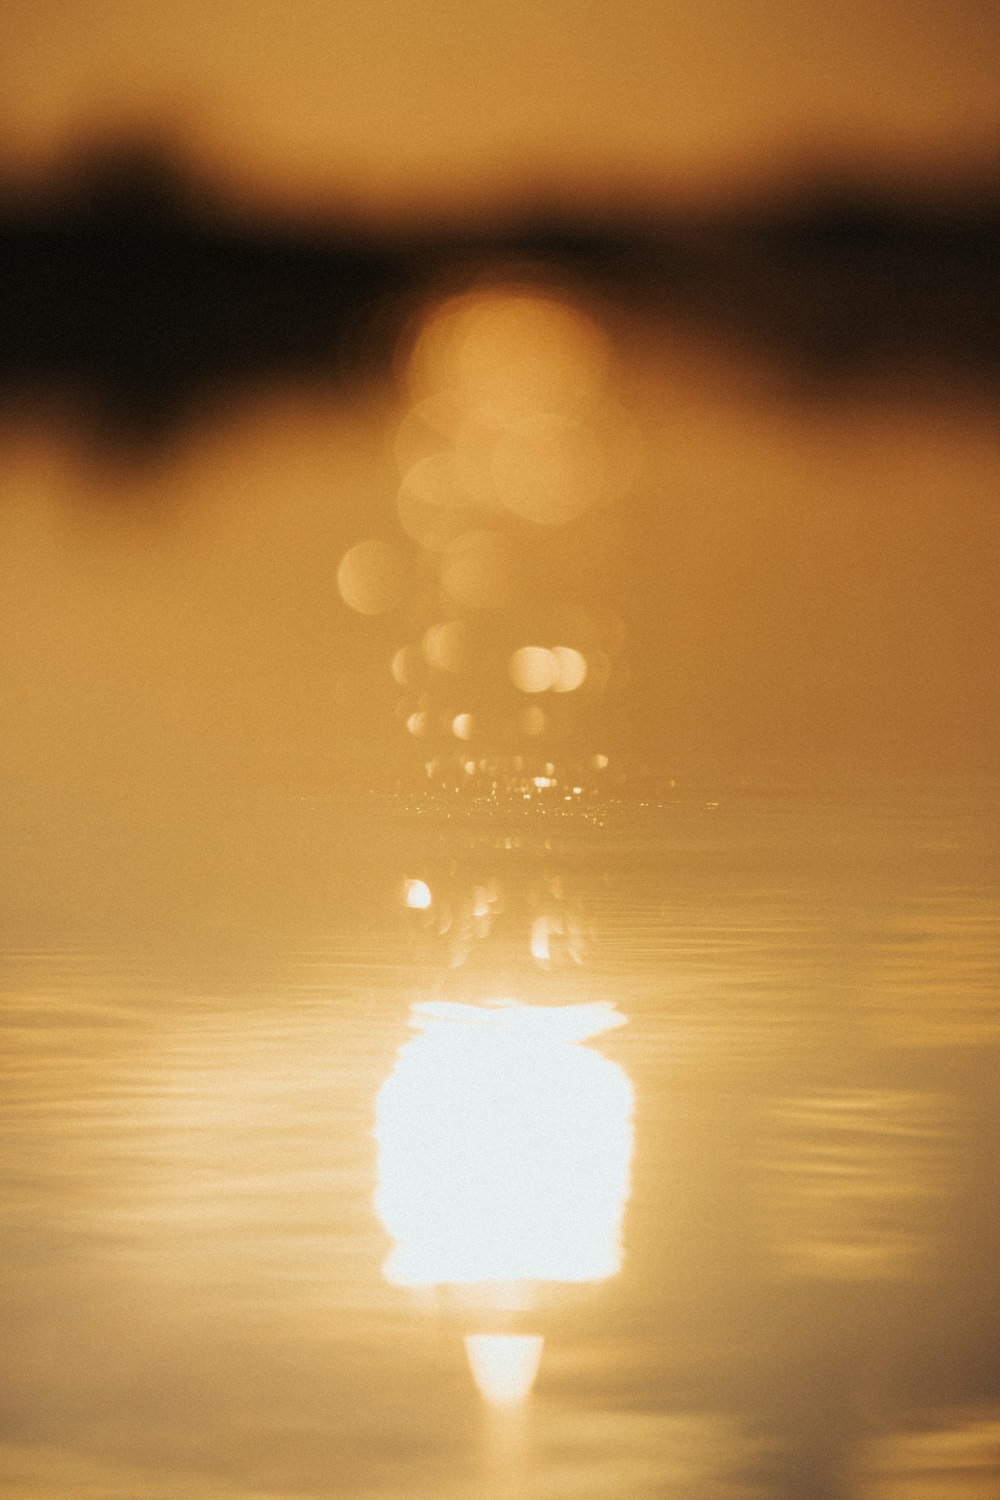 a blurry photo of the sun reflecting in the water